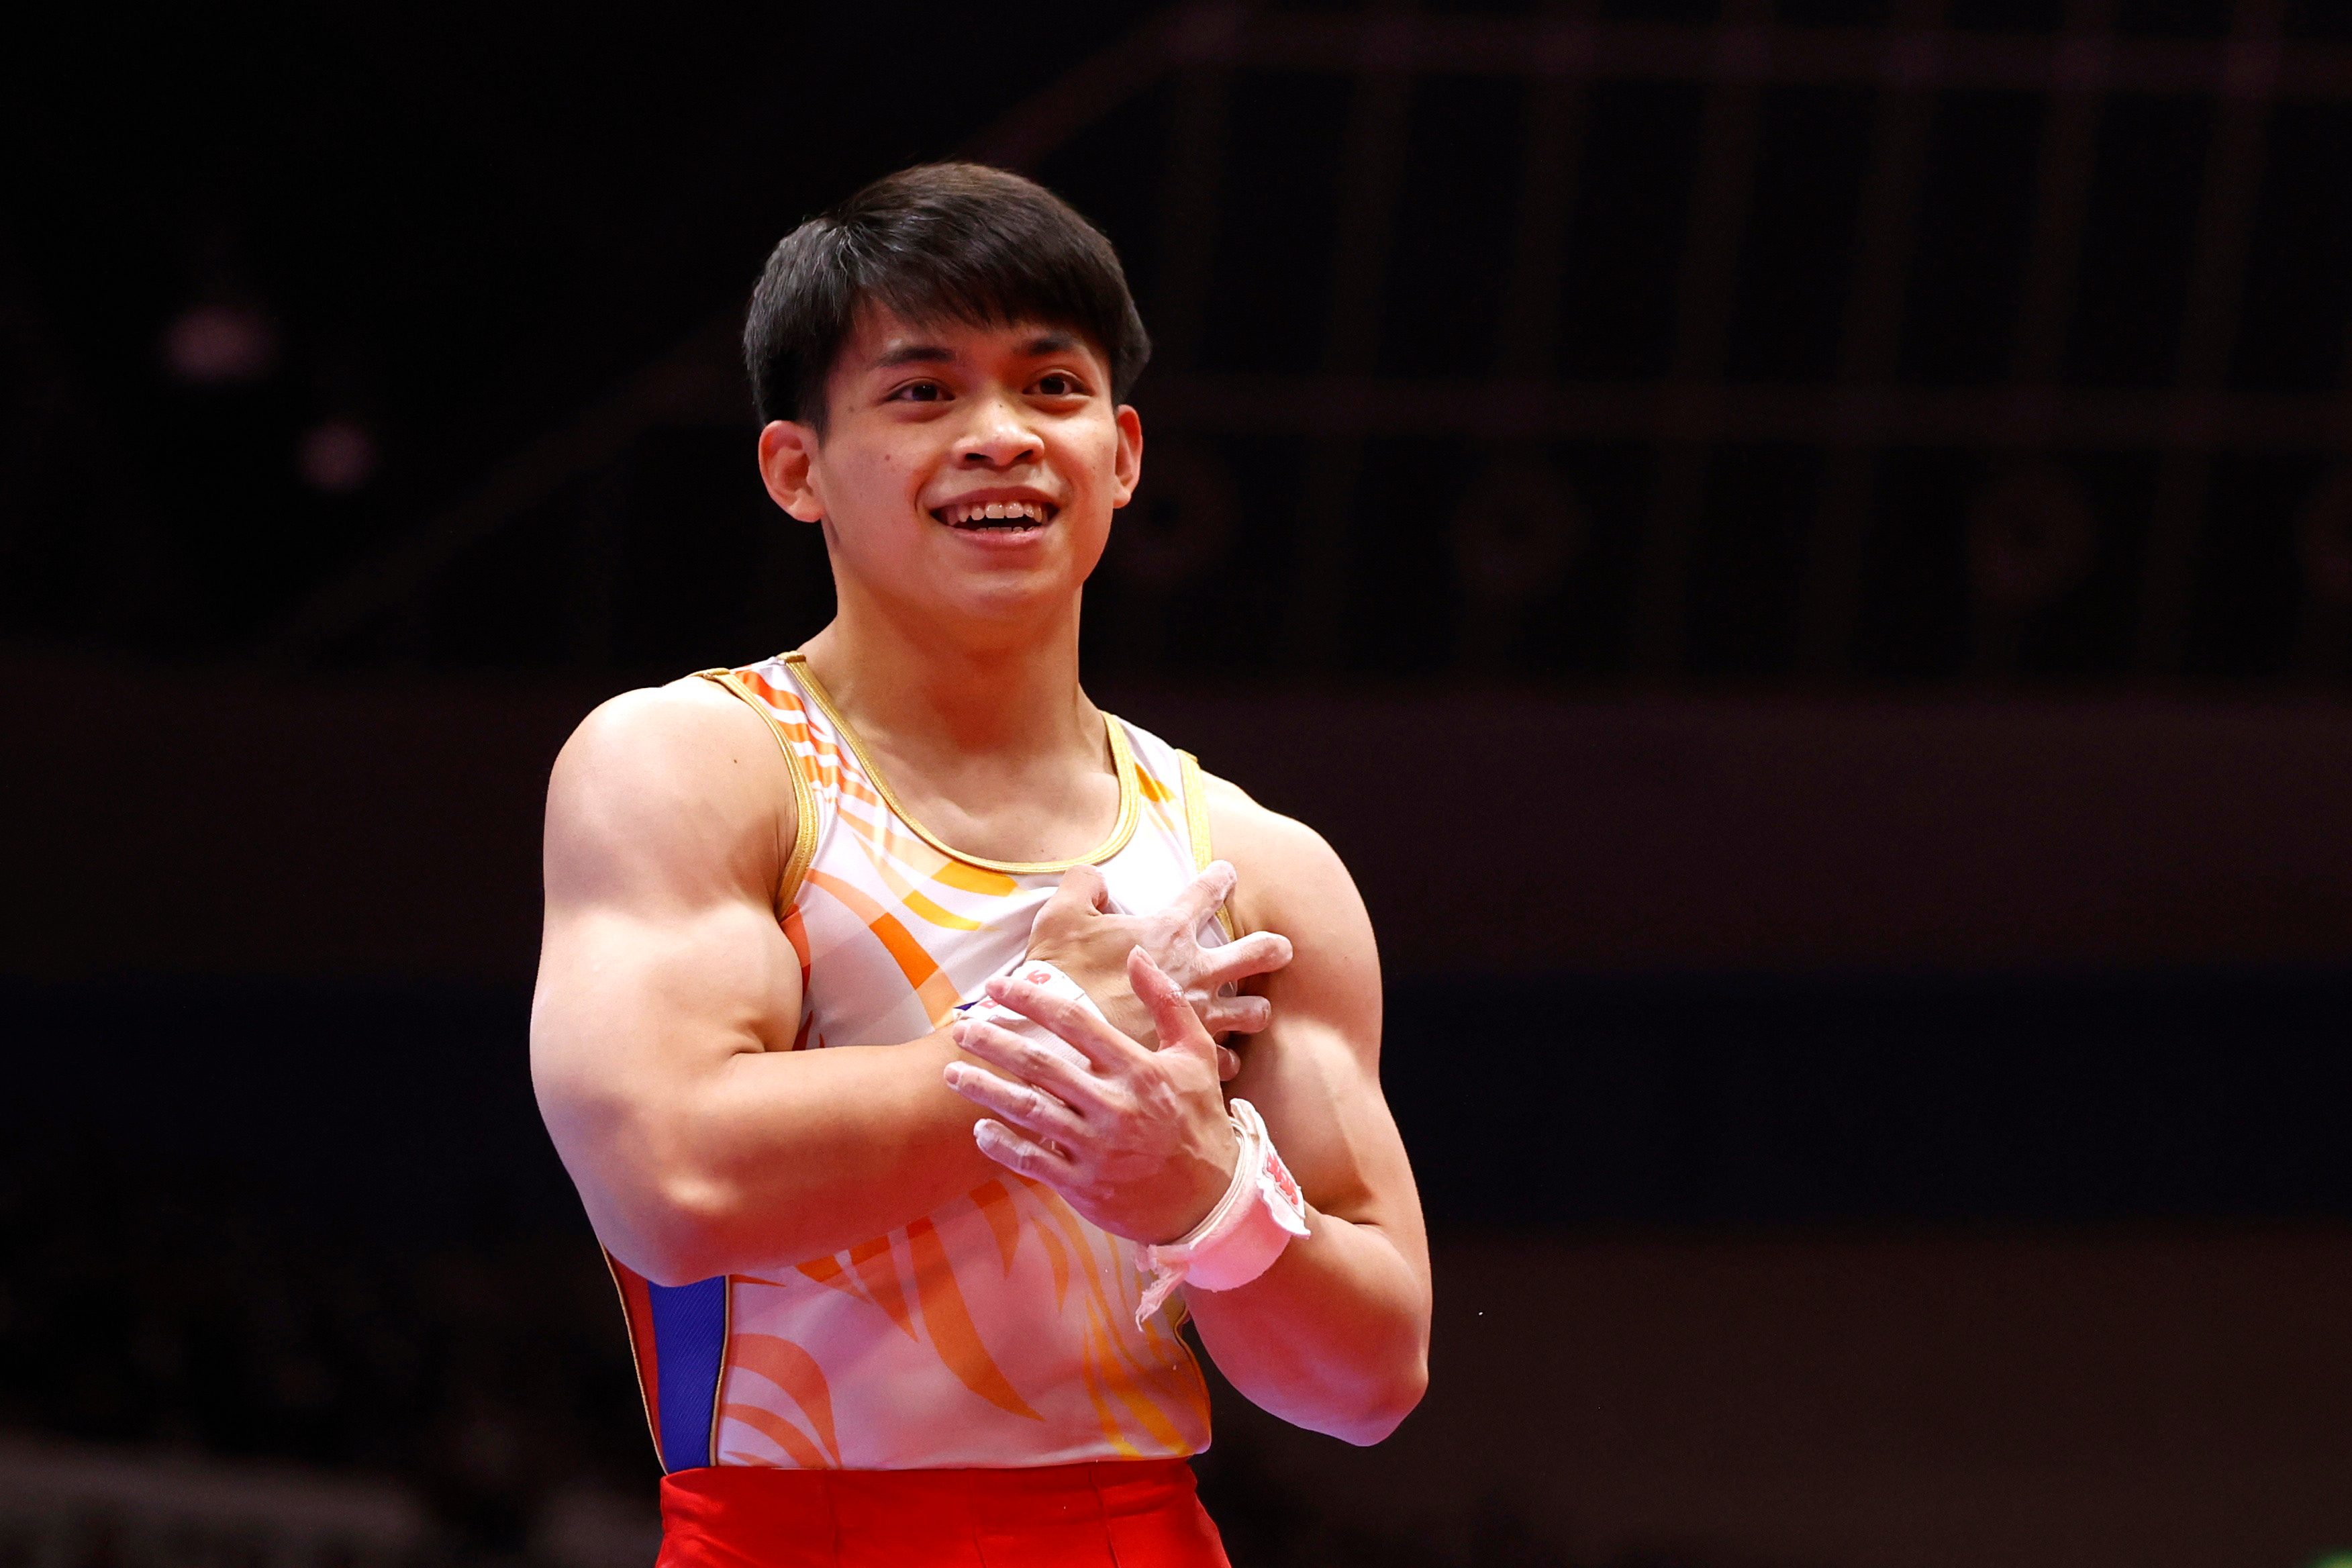 Carlos Yulo dreams of competing with siblings in the Olympics